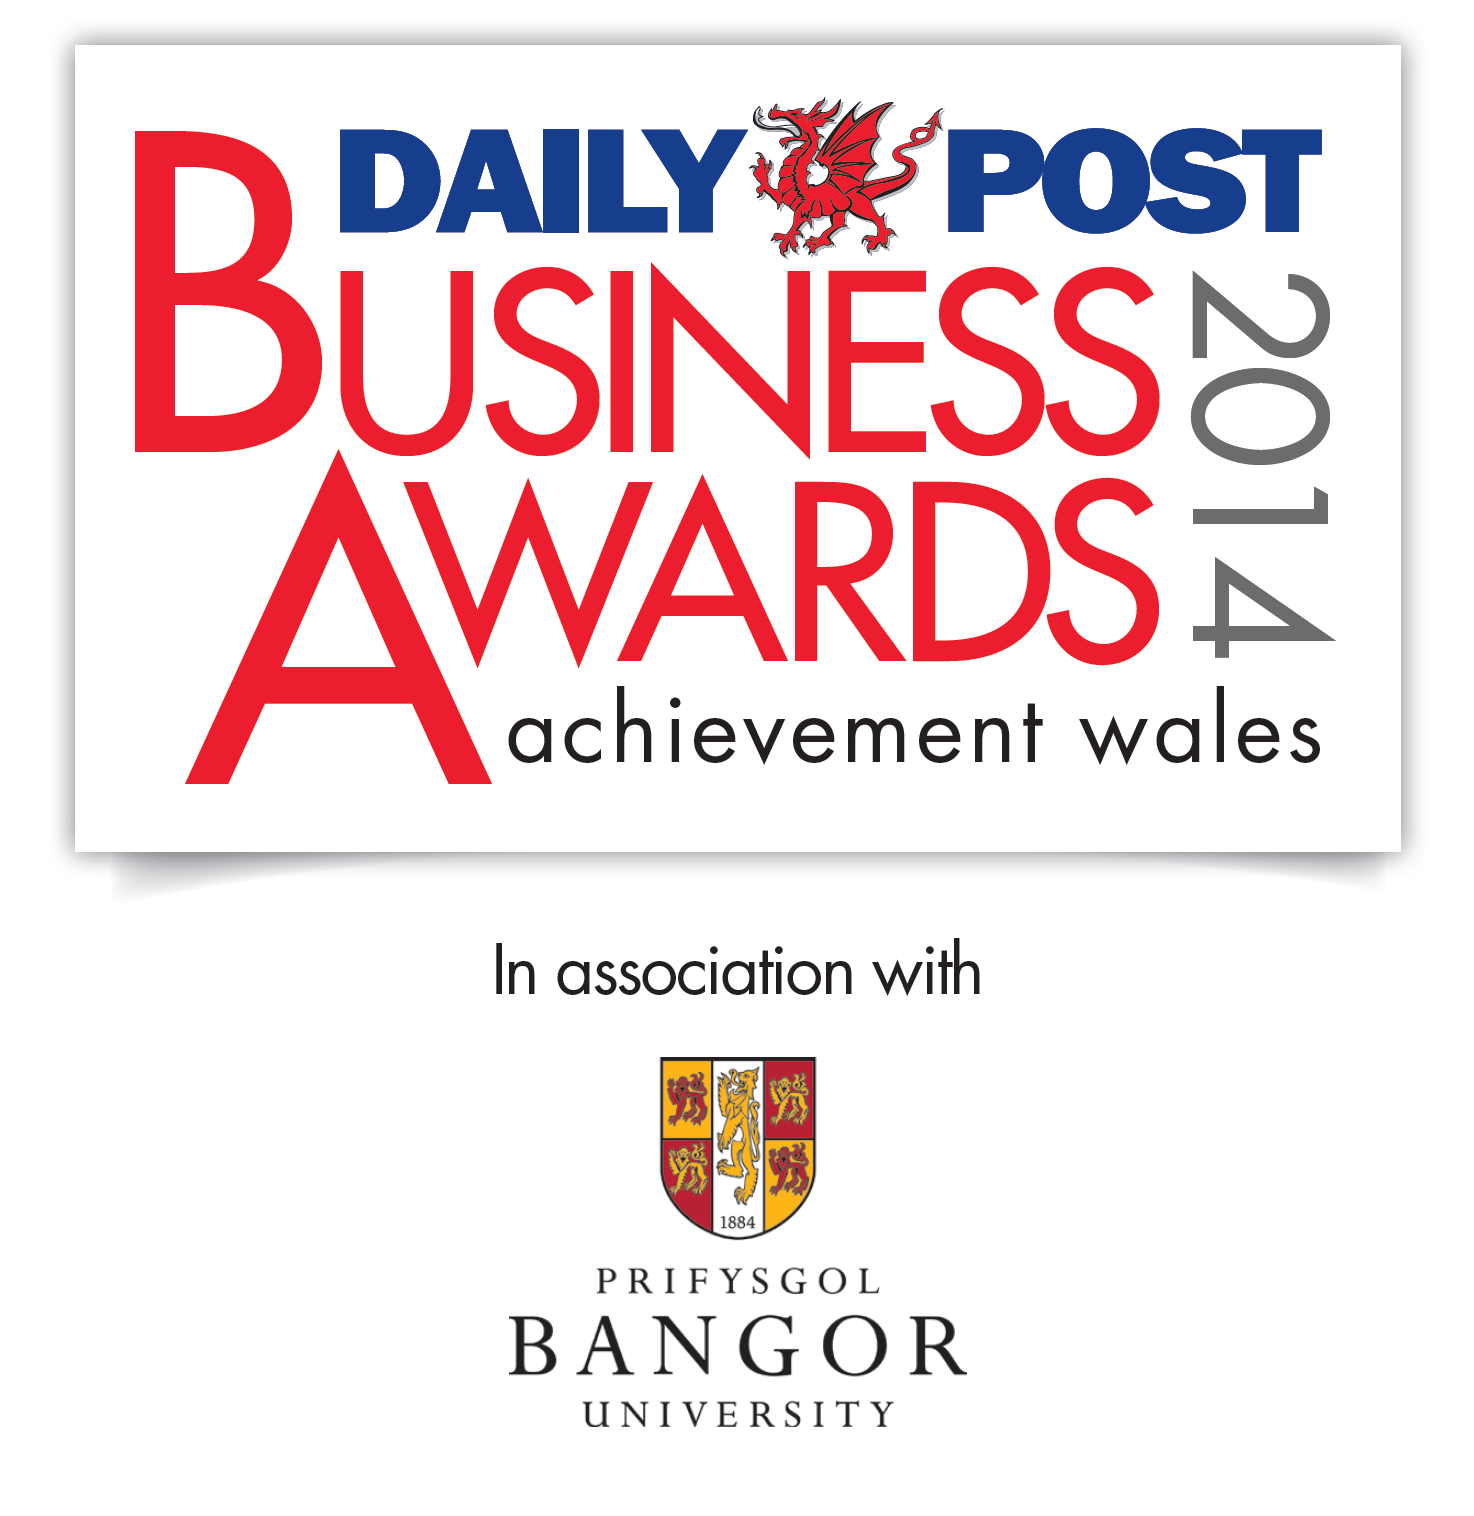 Papertrail Shortlisted in Daily Post Business Awards 2014